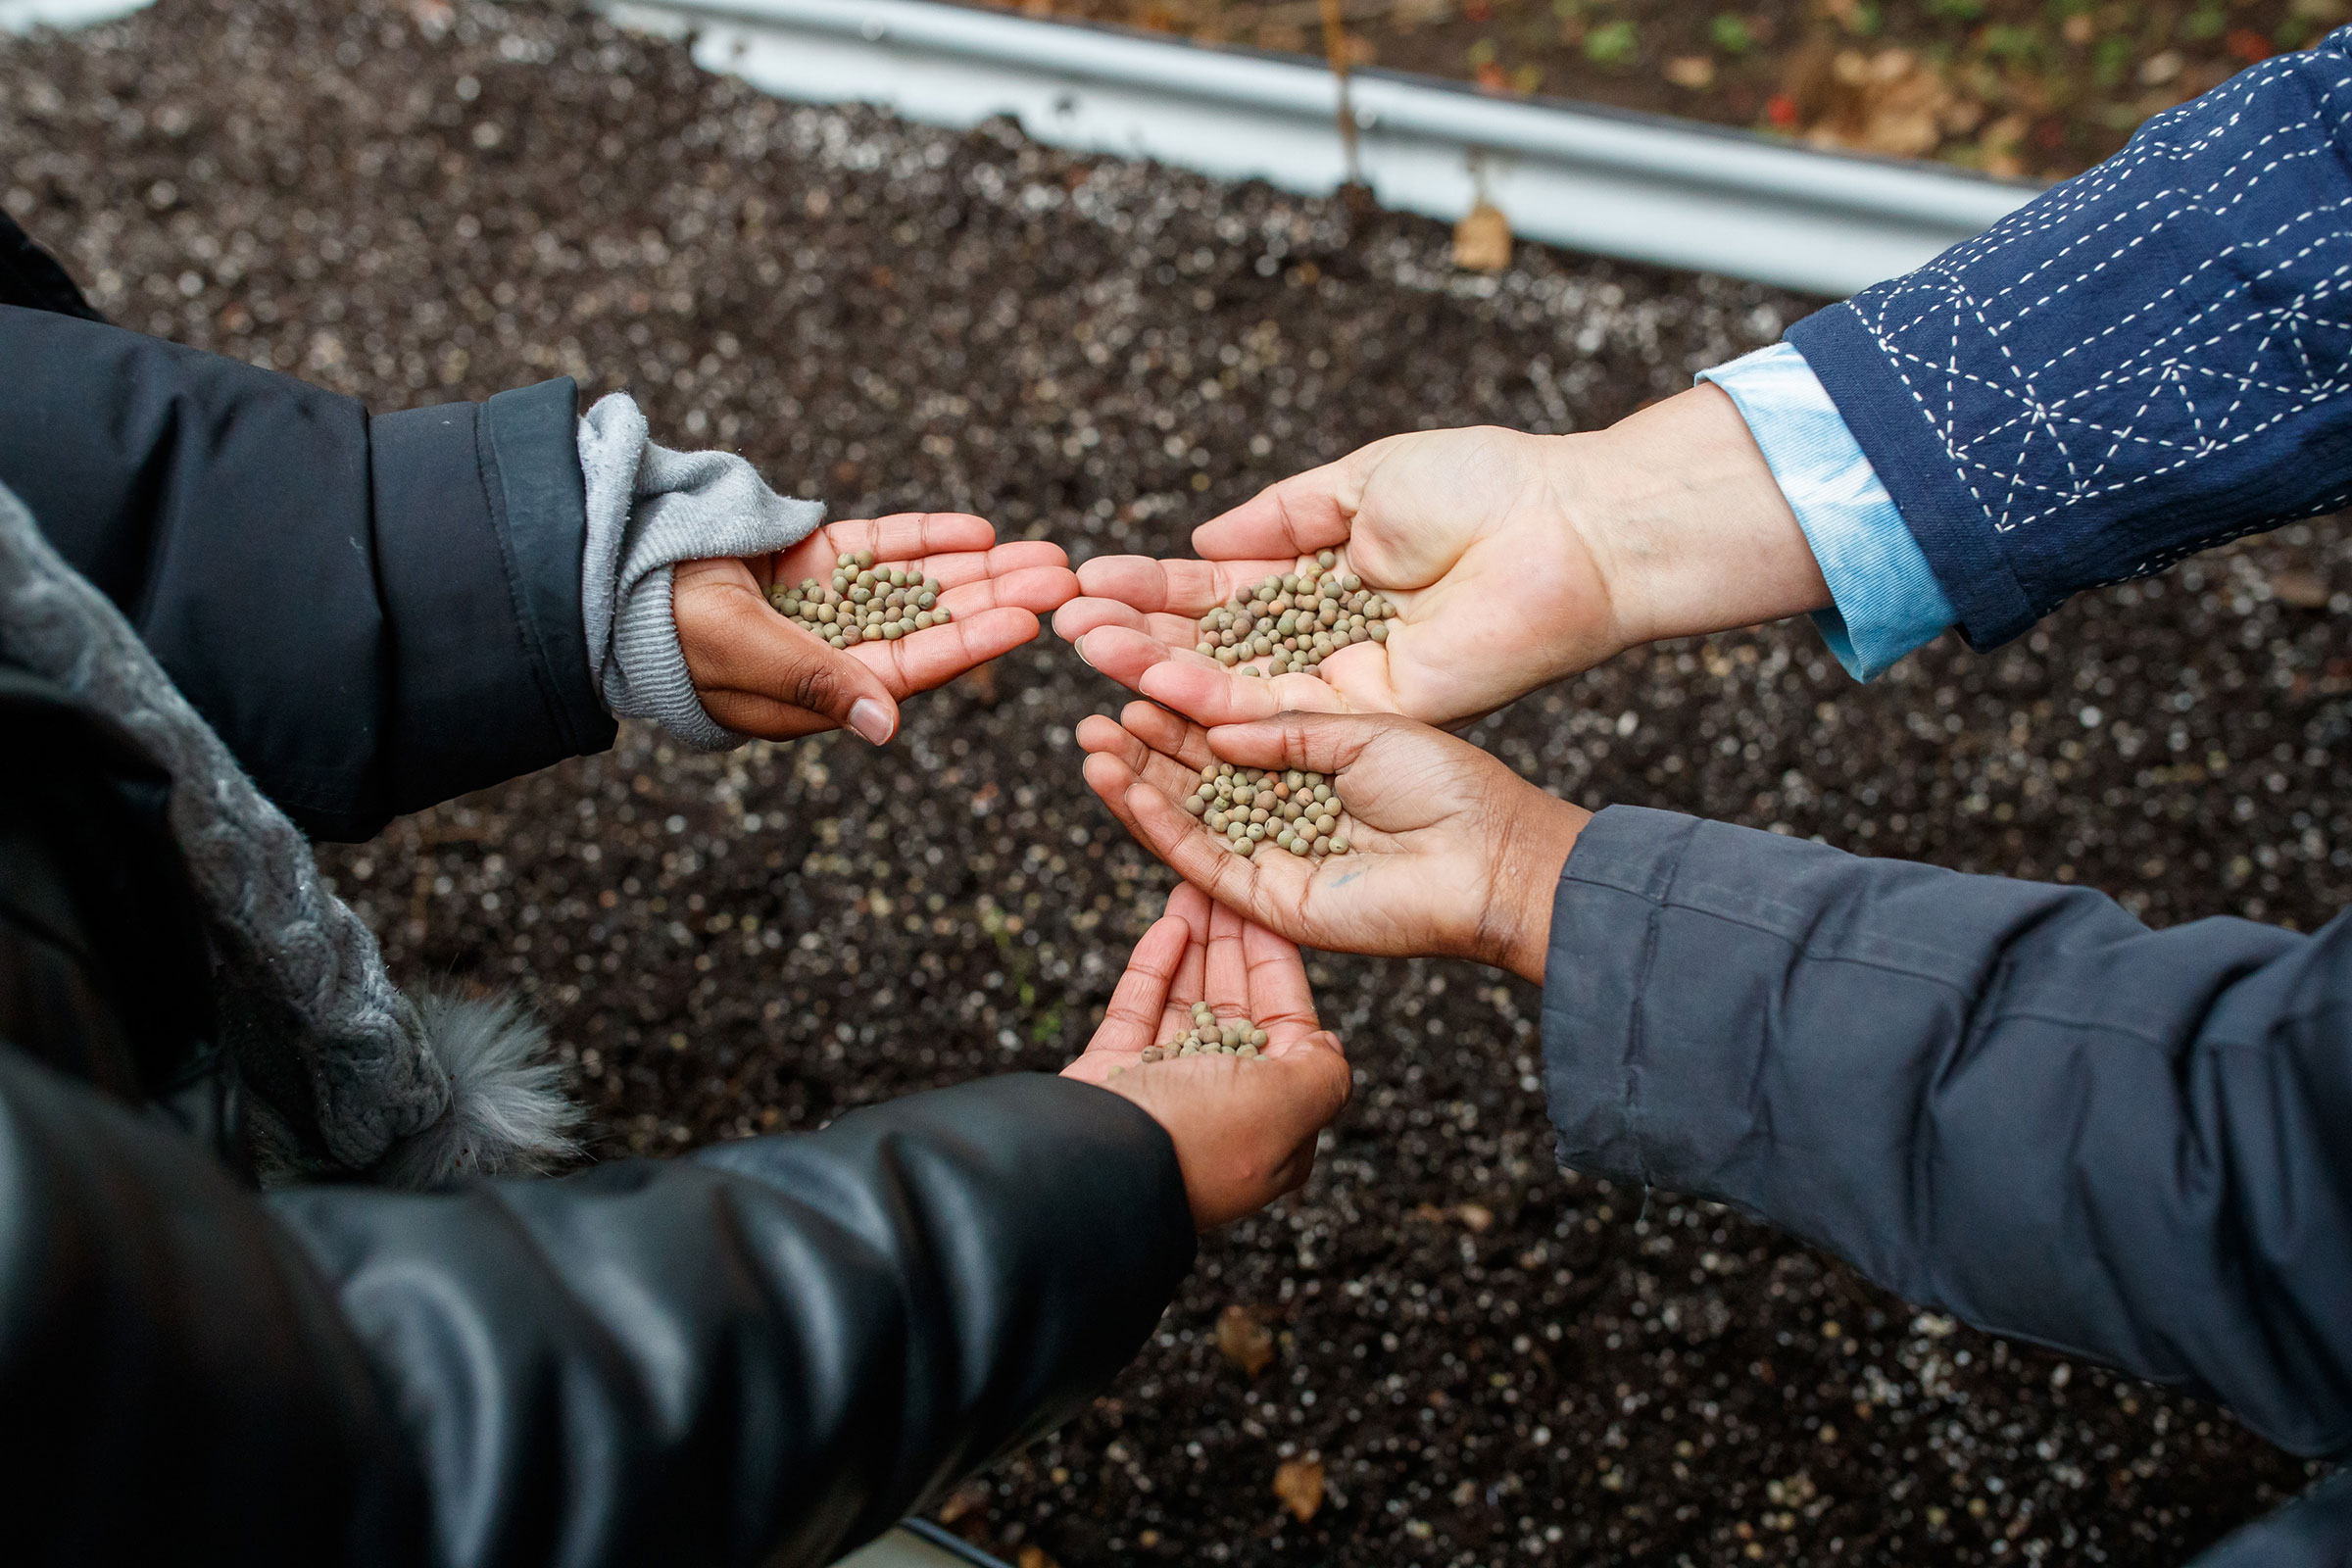 PS270 students helping to plant seeds for next spring in the Textile Dye Garden (photo by Ron Hester Photography)